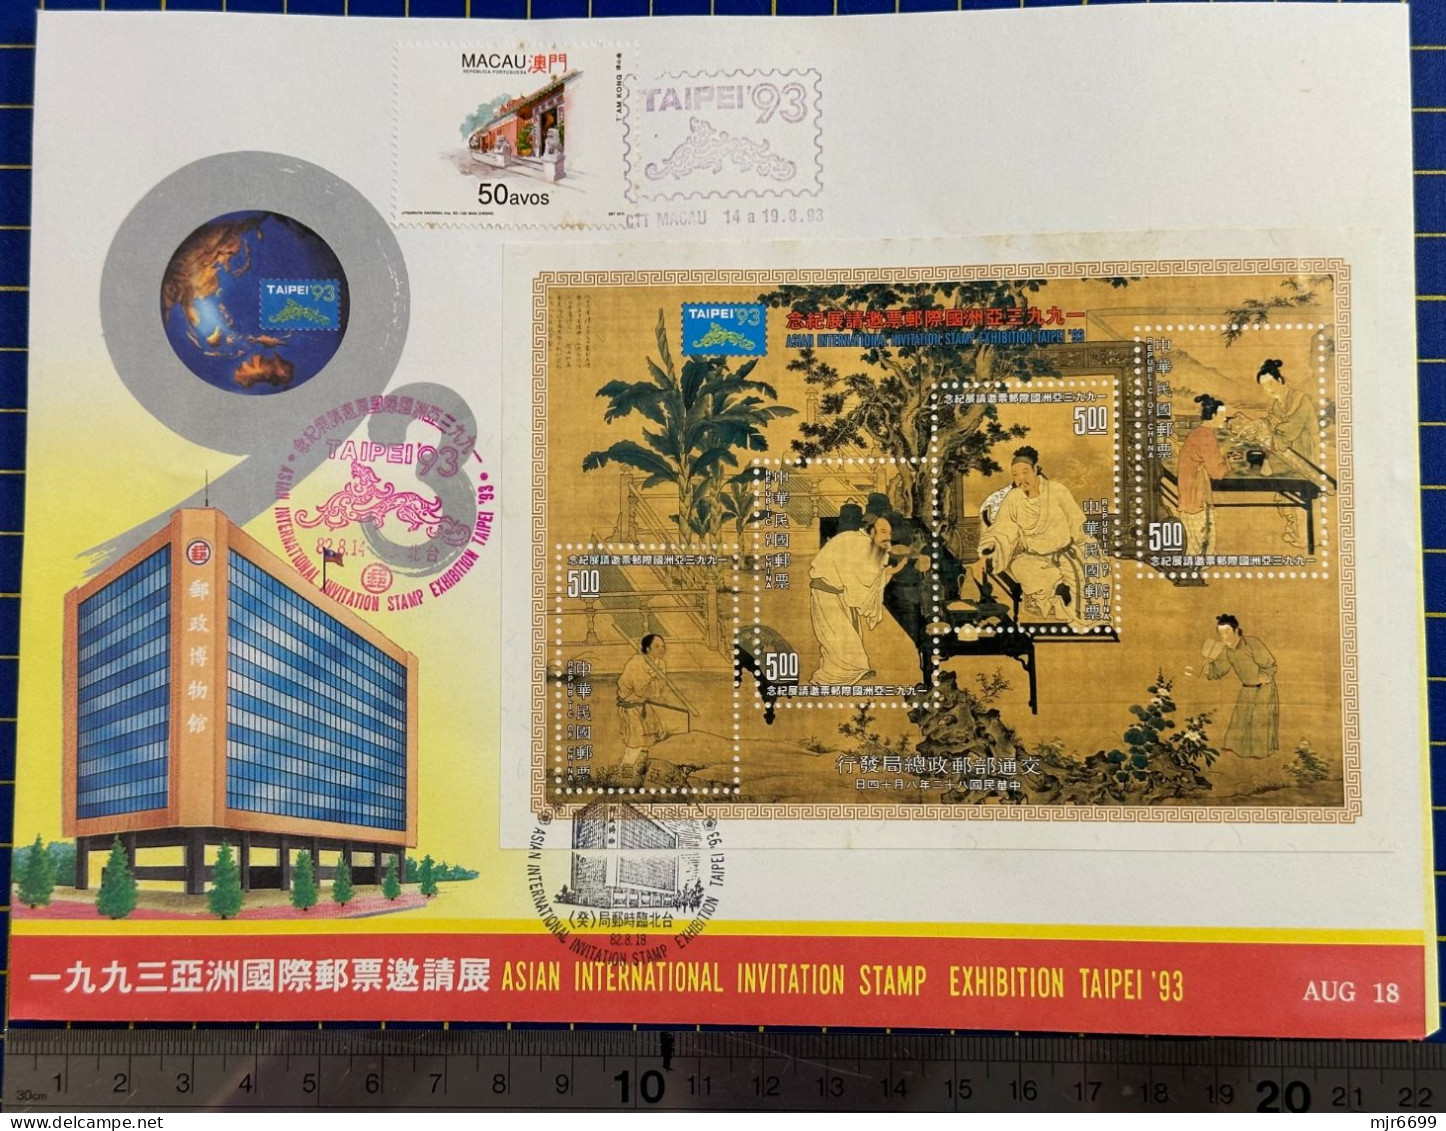 1993 ASIAN INTERNATINAL STAMP EXHIBITION COMM. SOUVENIR COVER W/ MACAU CANCEL, PLEASE SEE THE PHOTO - FDC